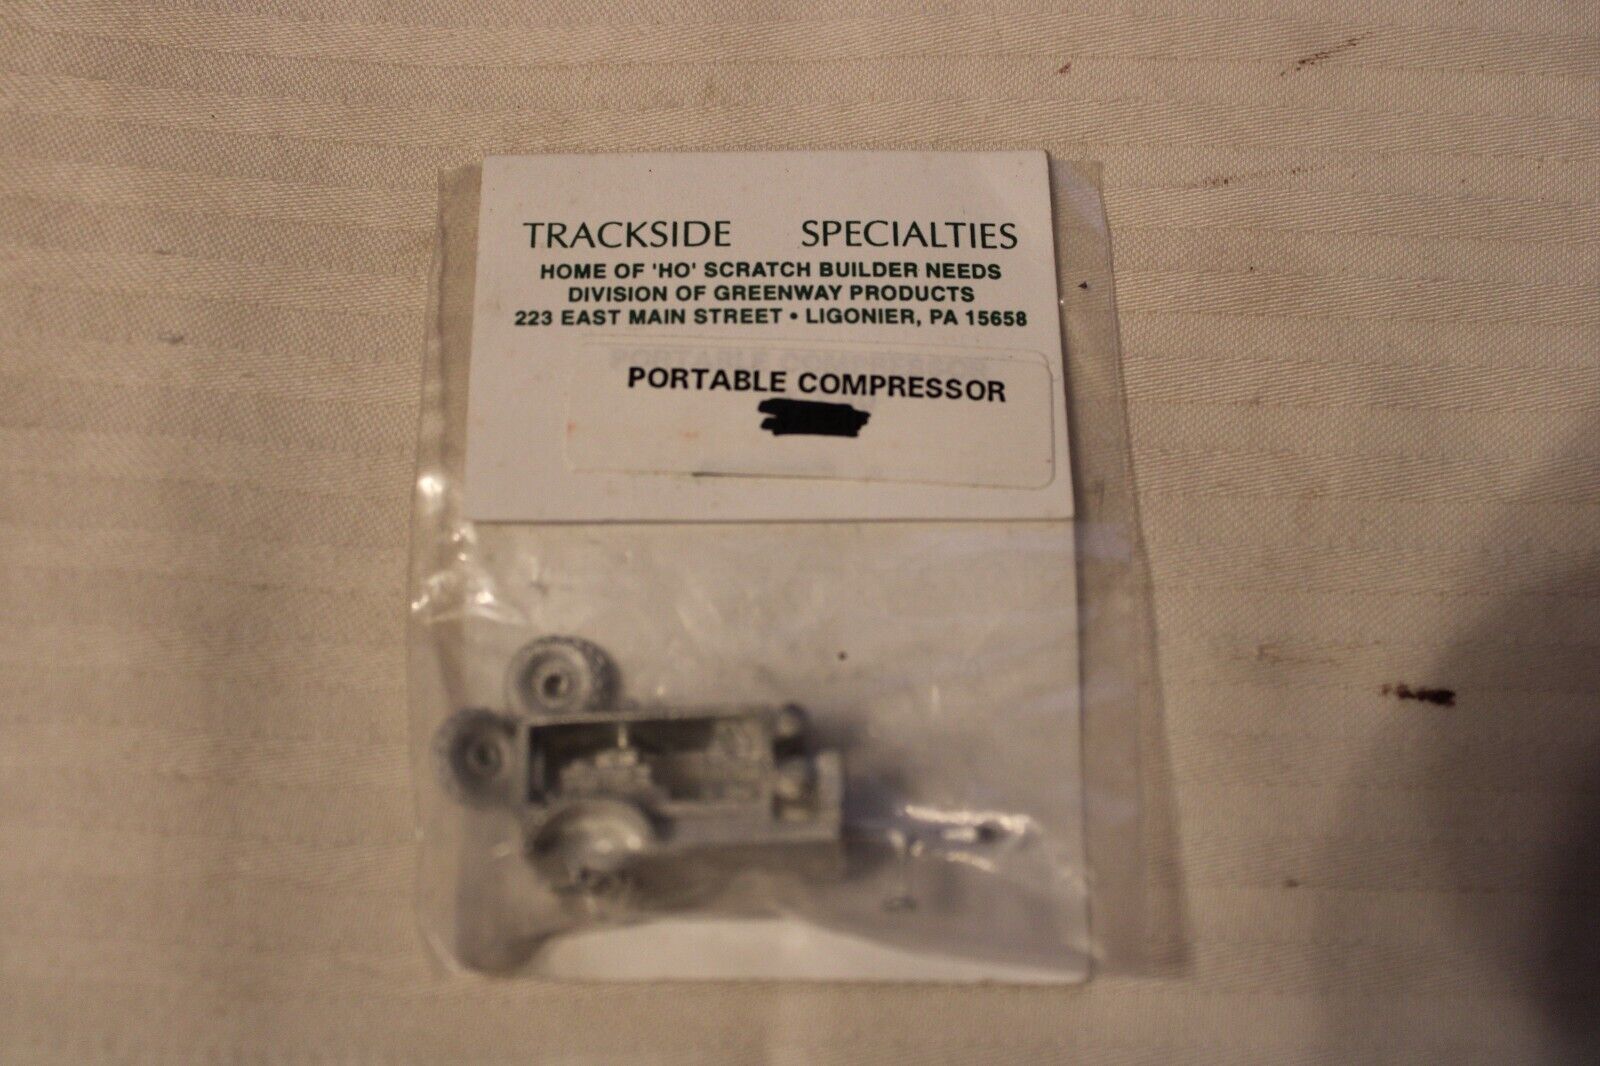 Primary image for HO Scale Trackside Specialties, Portable Compressor Kit, White Metal BNOS